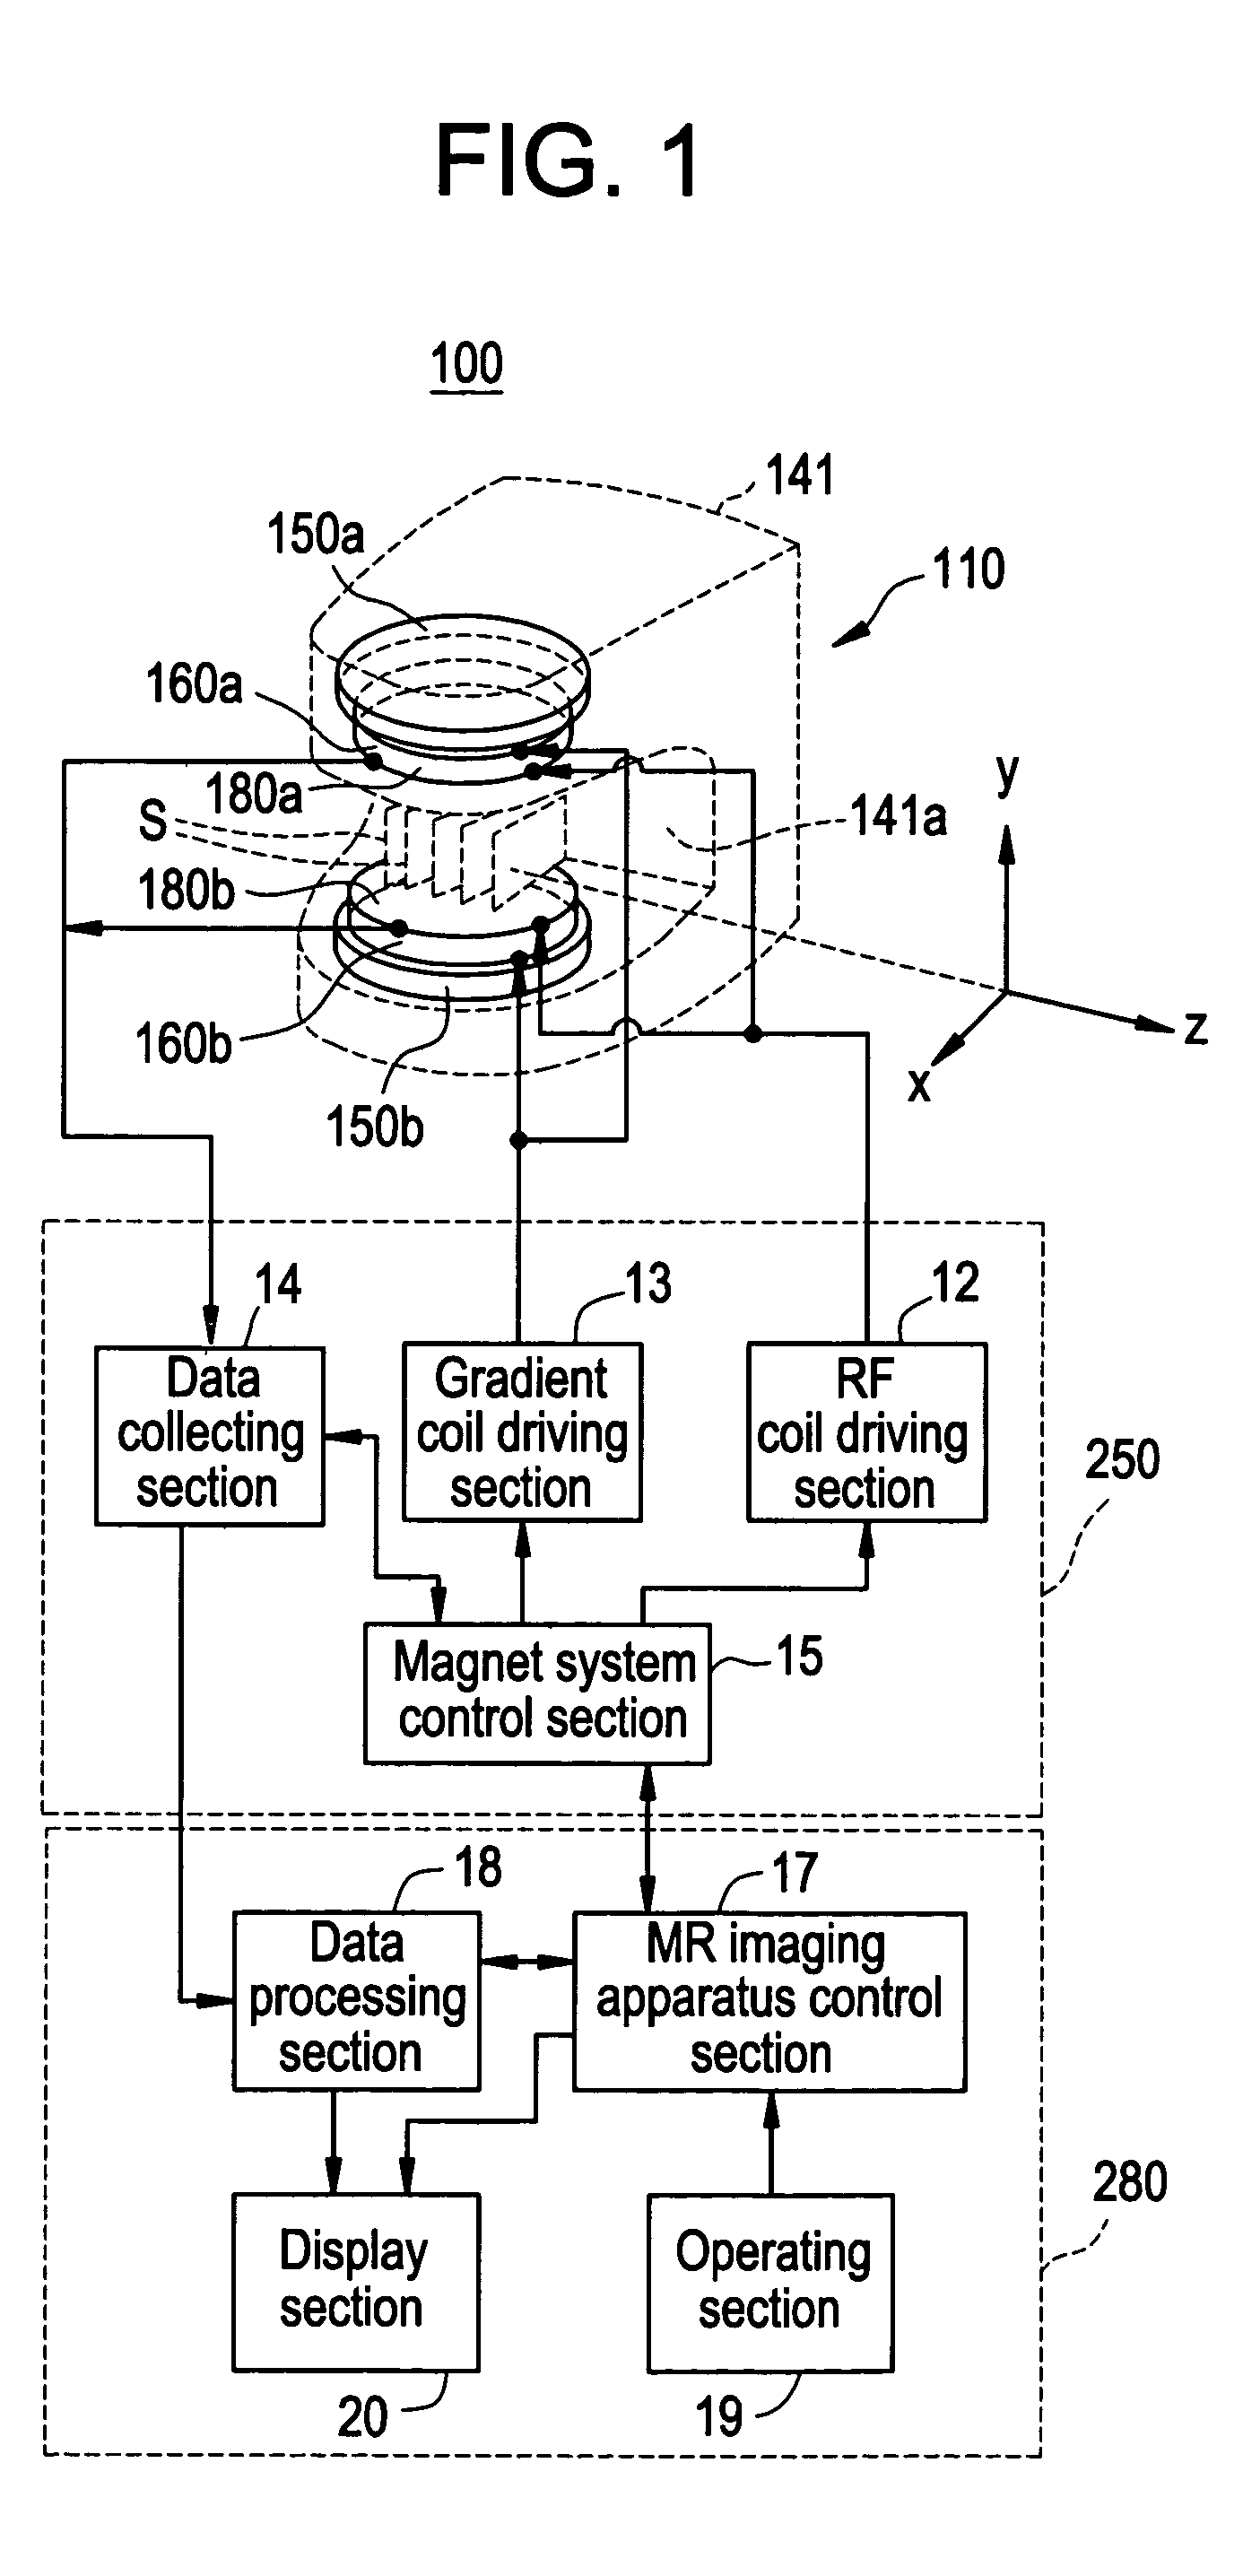 Magnetic resonance imaging apparatus and central frequency estimating method